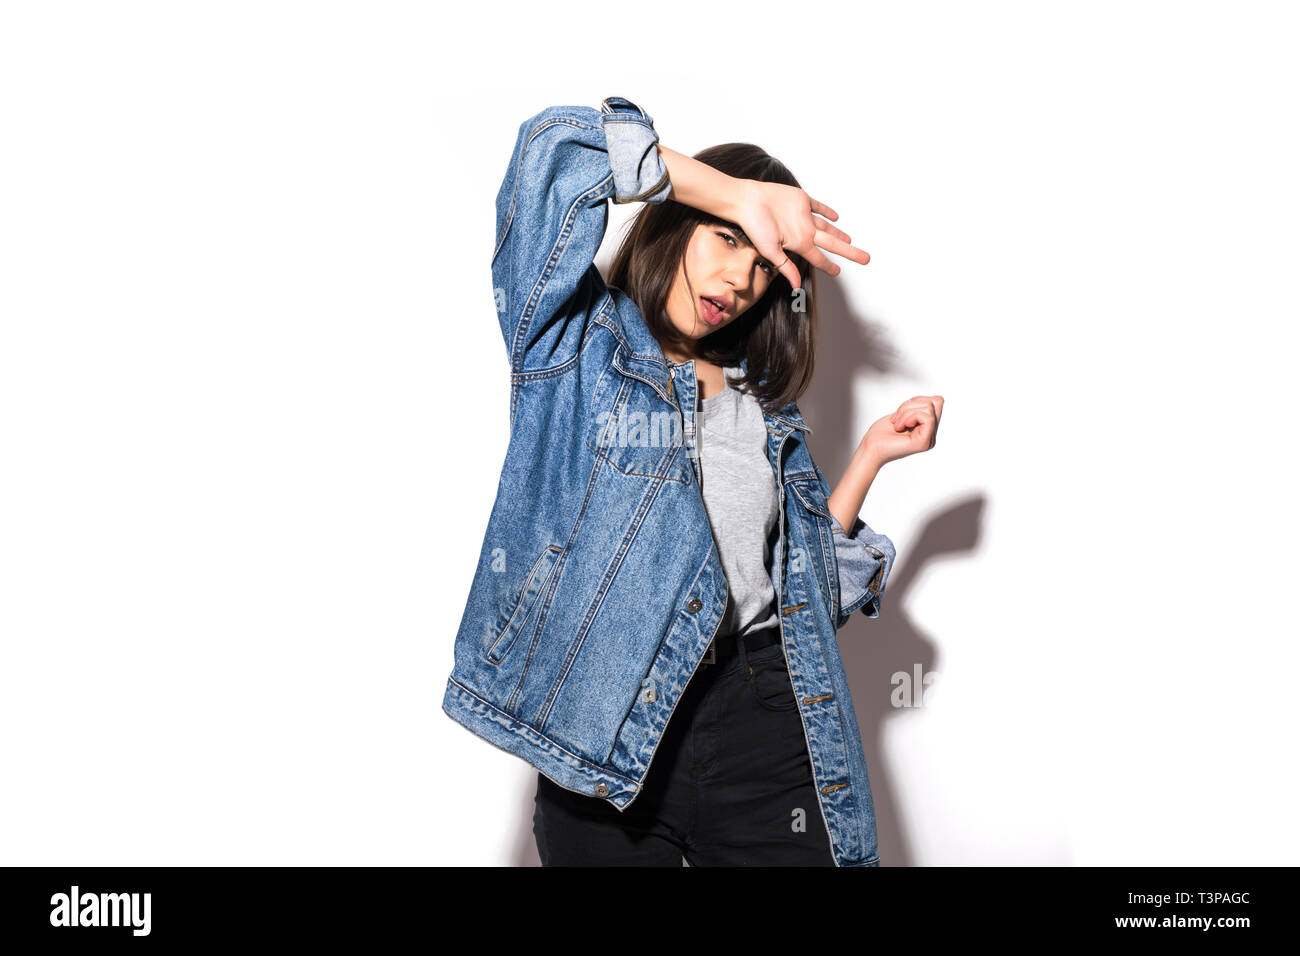 Portrait of a young woman dressed in jeans jacket standing isolated on a white background. Look at camera. Stock Photo